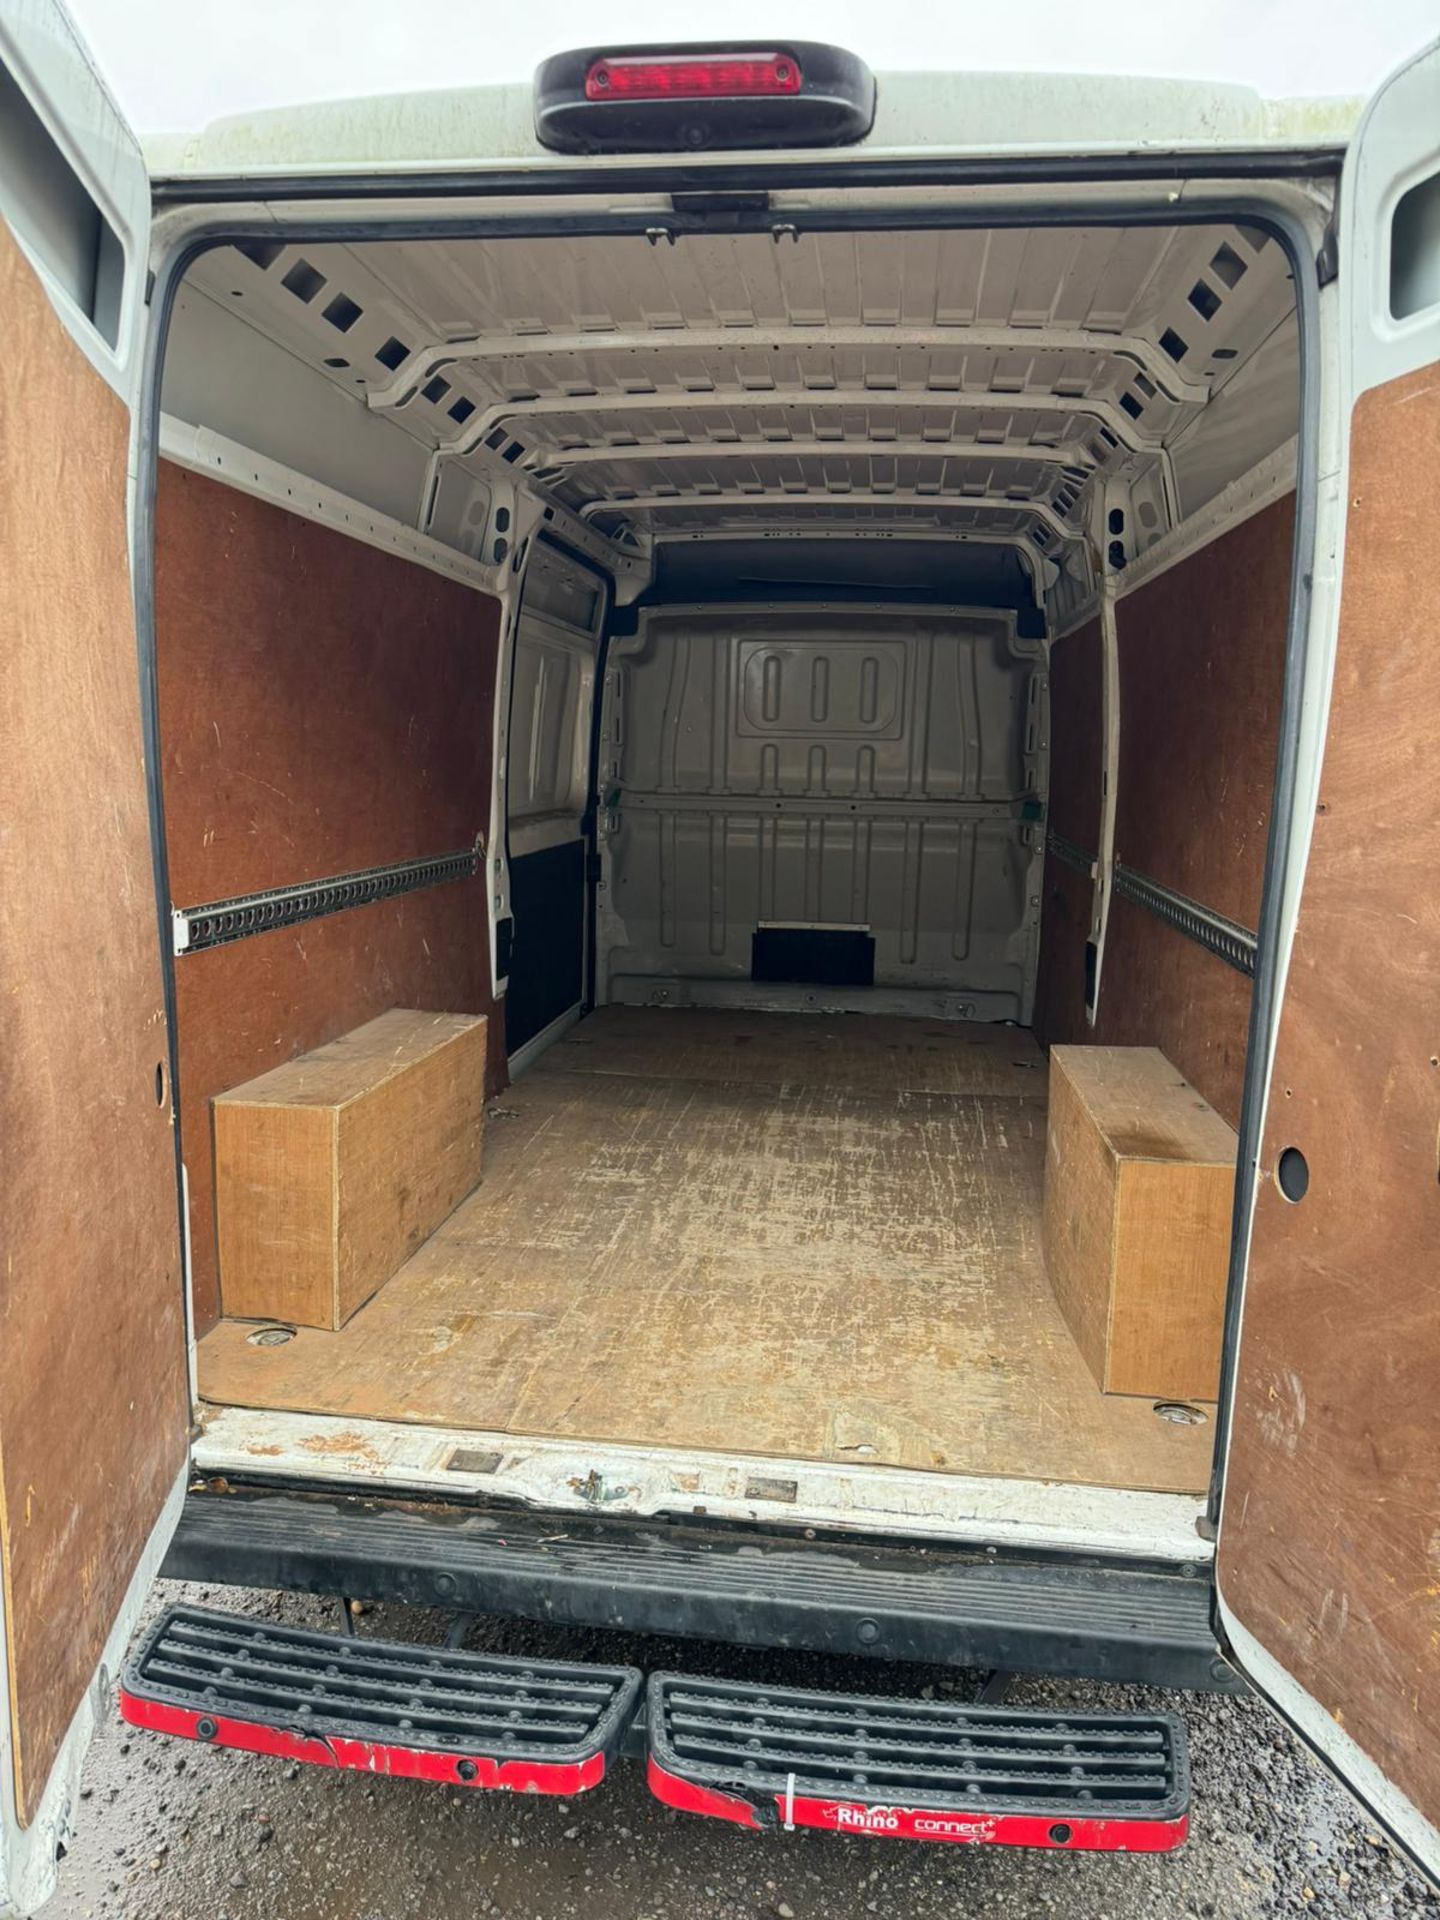 2019 19 CITROEN RELAY PANEL VAN -140K MILES - L3 H2 MODEL - PLY LINED - AIR CON - Image 3 of 8